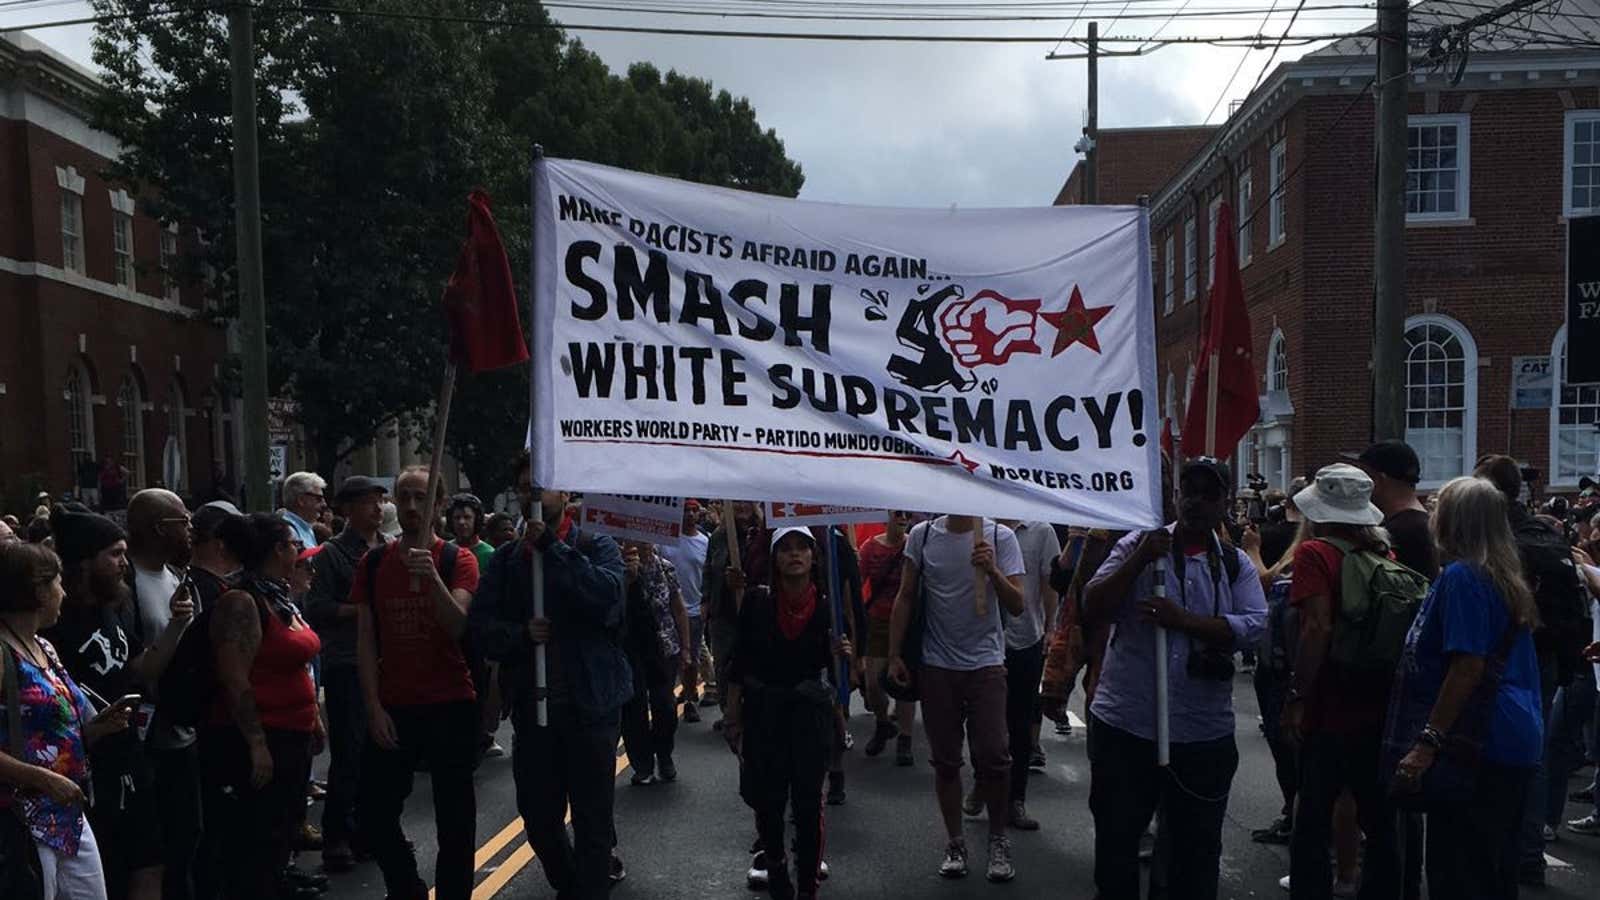 Protestors are singing and marching against white supremacy in Charlottesville